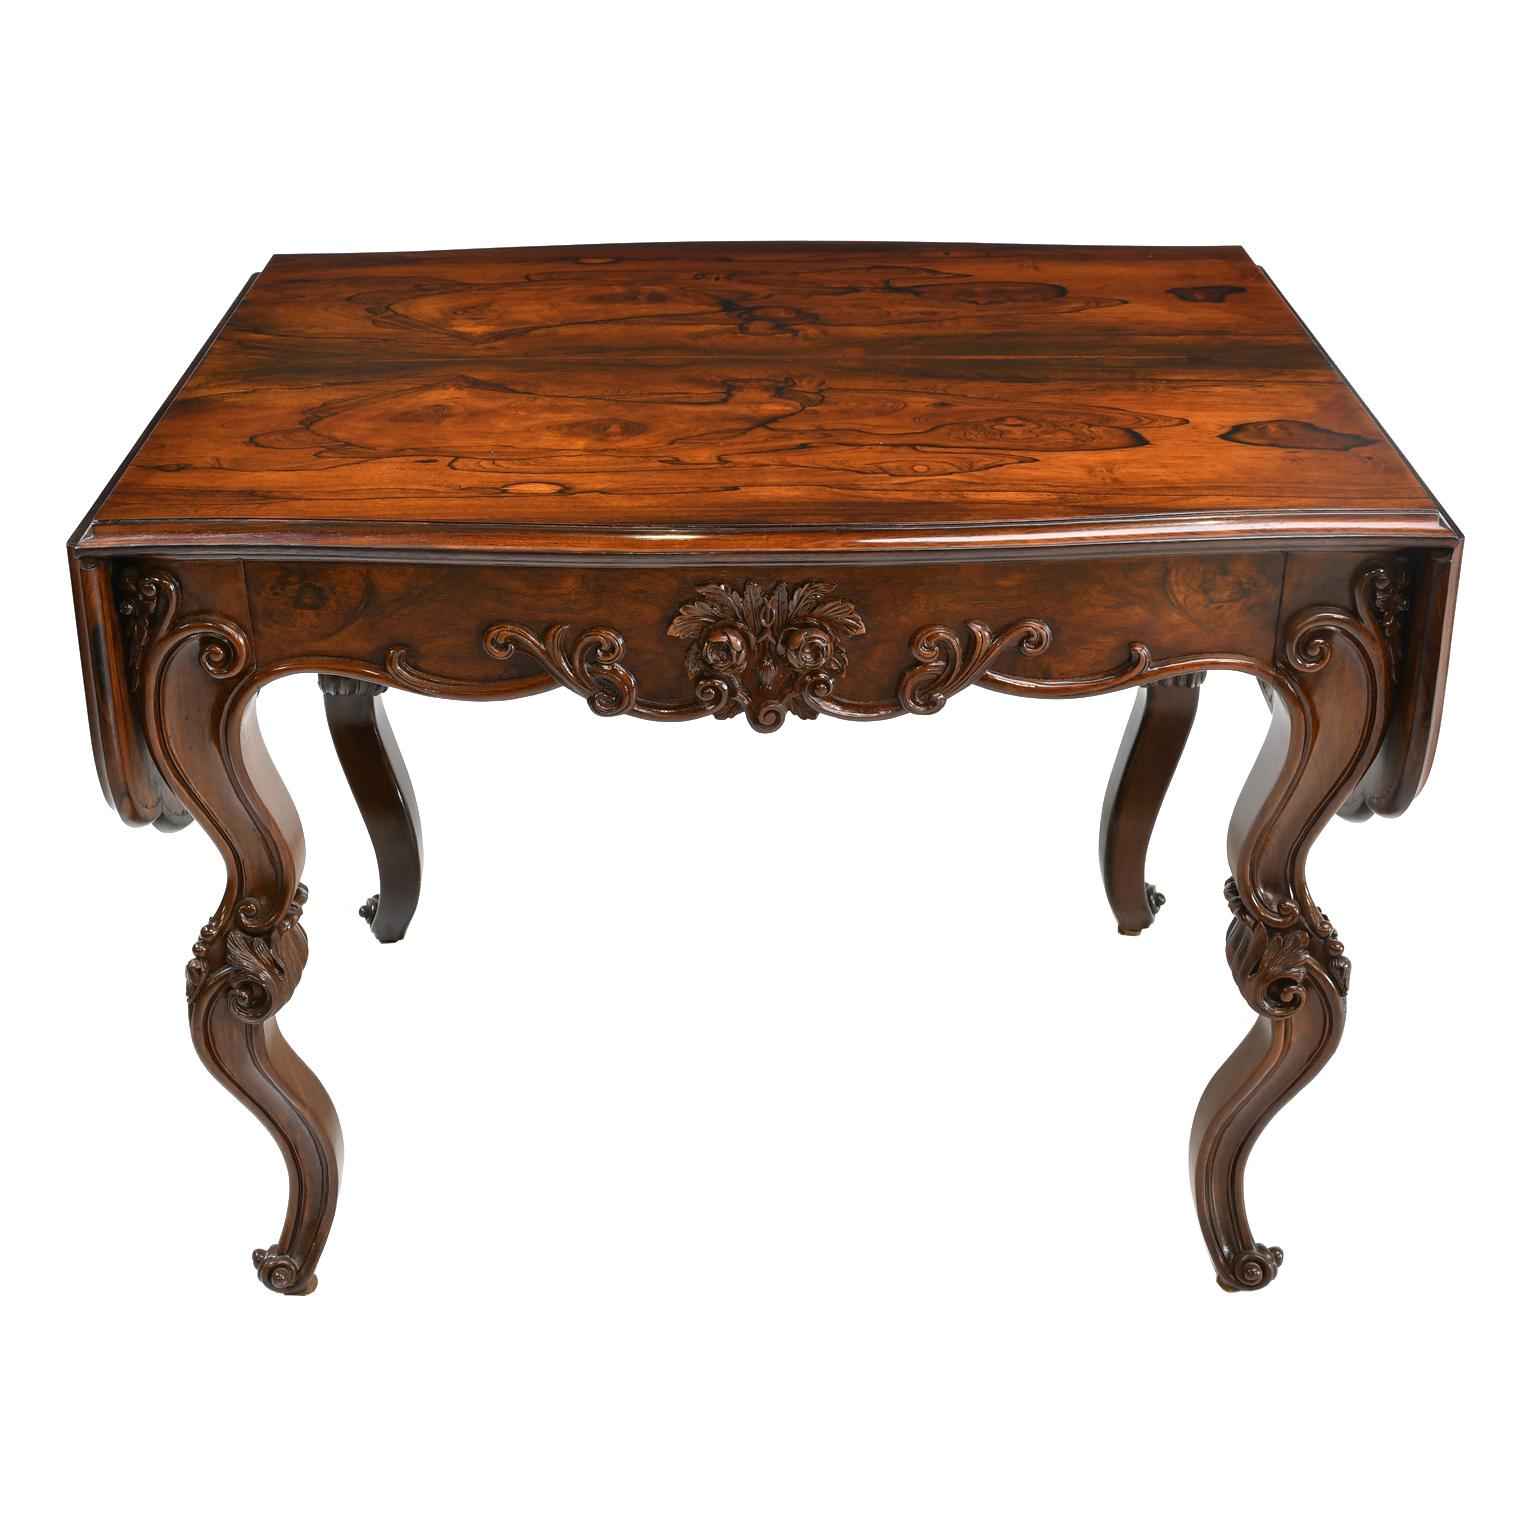 Rosewood American Rococo Revival Sofa Table or Writing Table NYC, circa 1840 For Sale 4